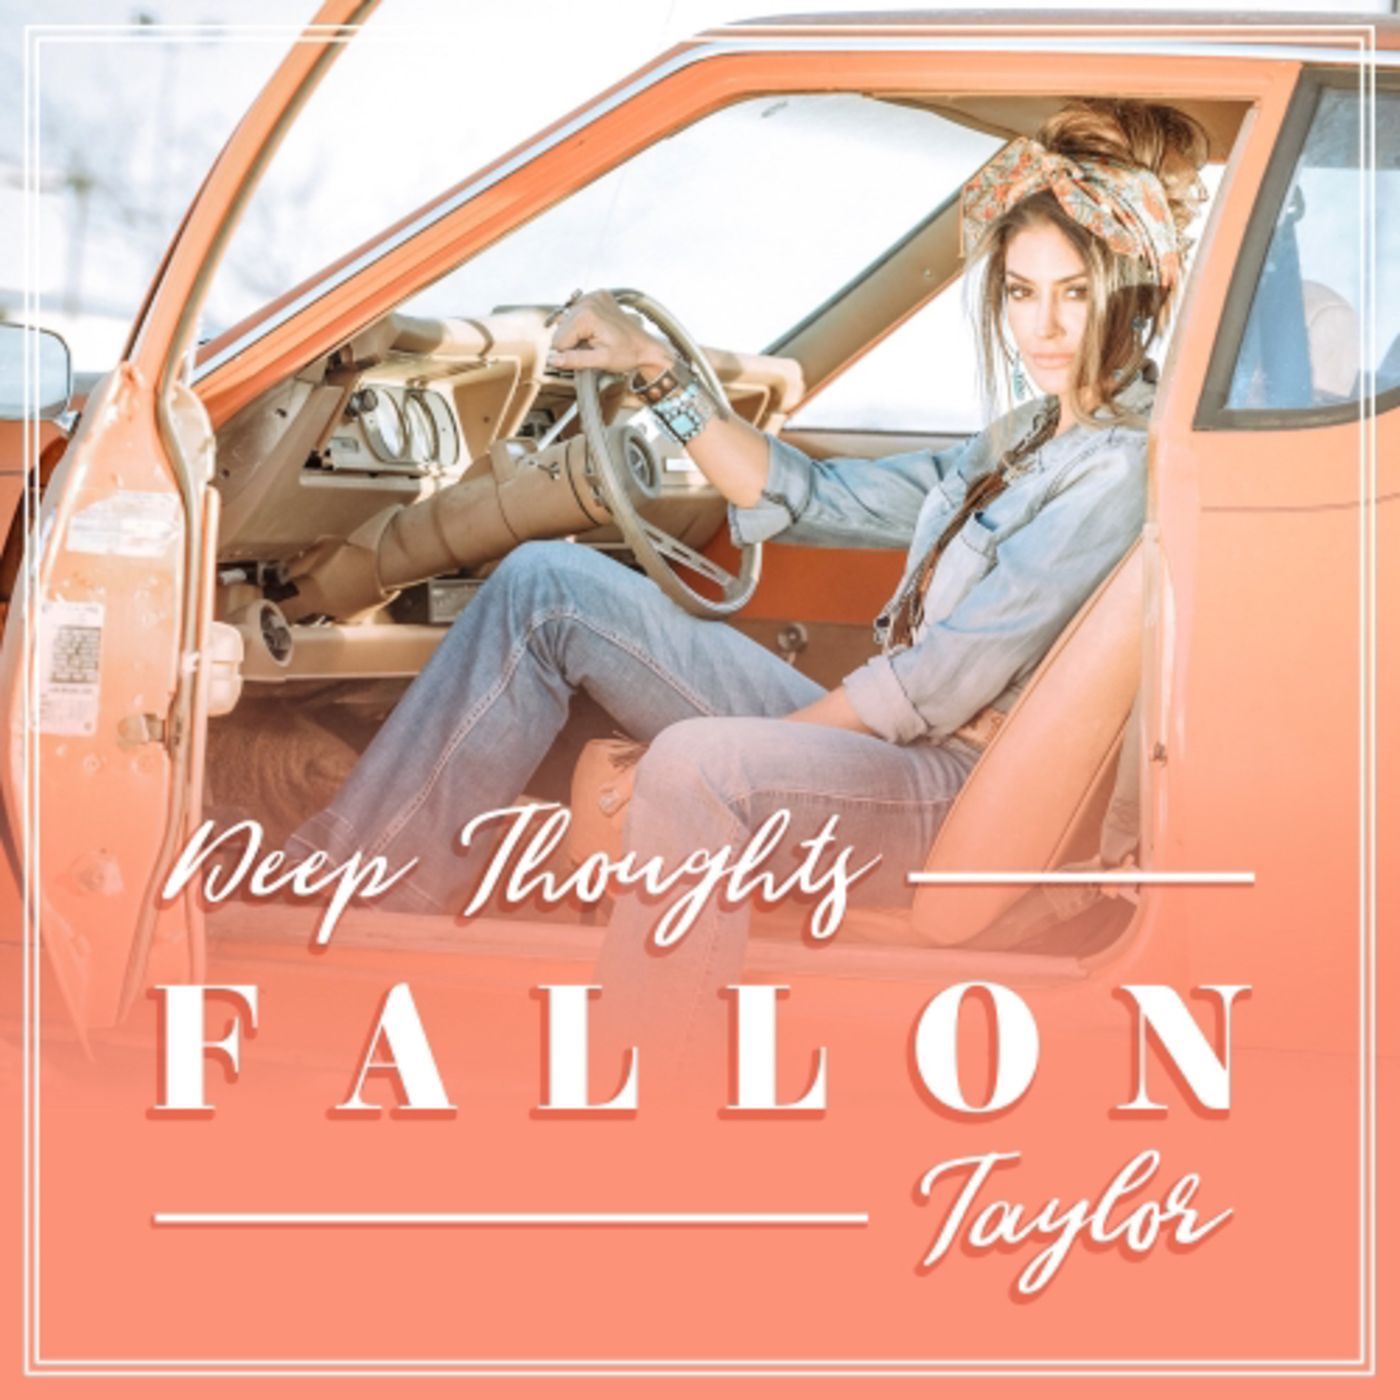 Answering Your Questions! Q&A With Fallon Taylor